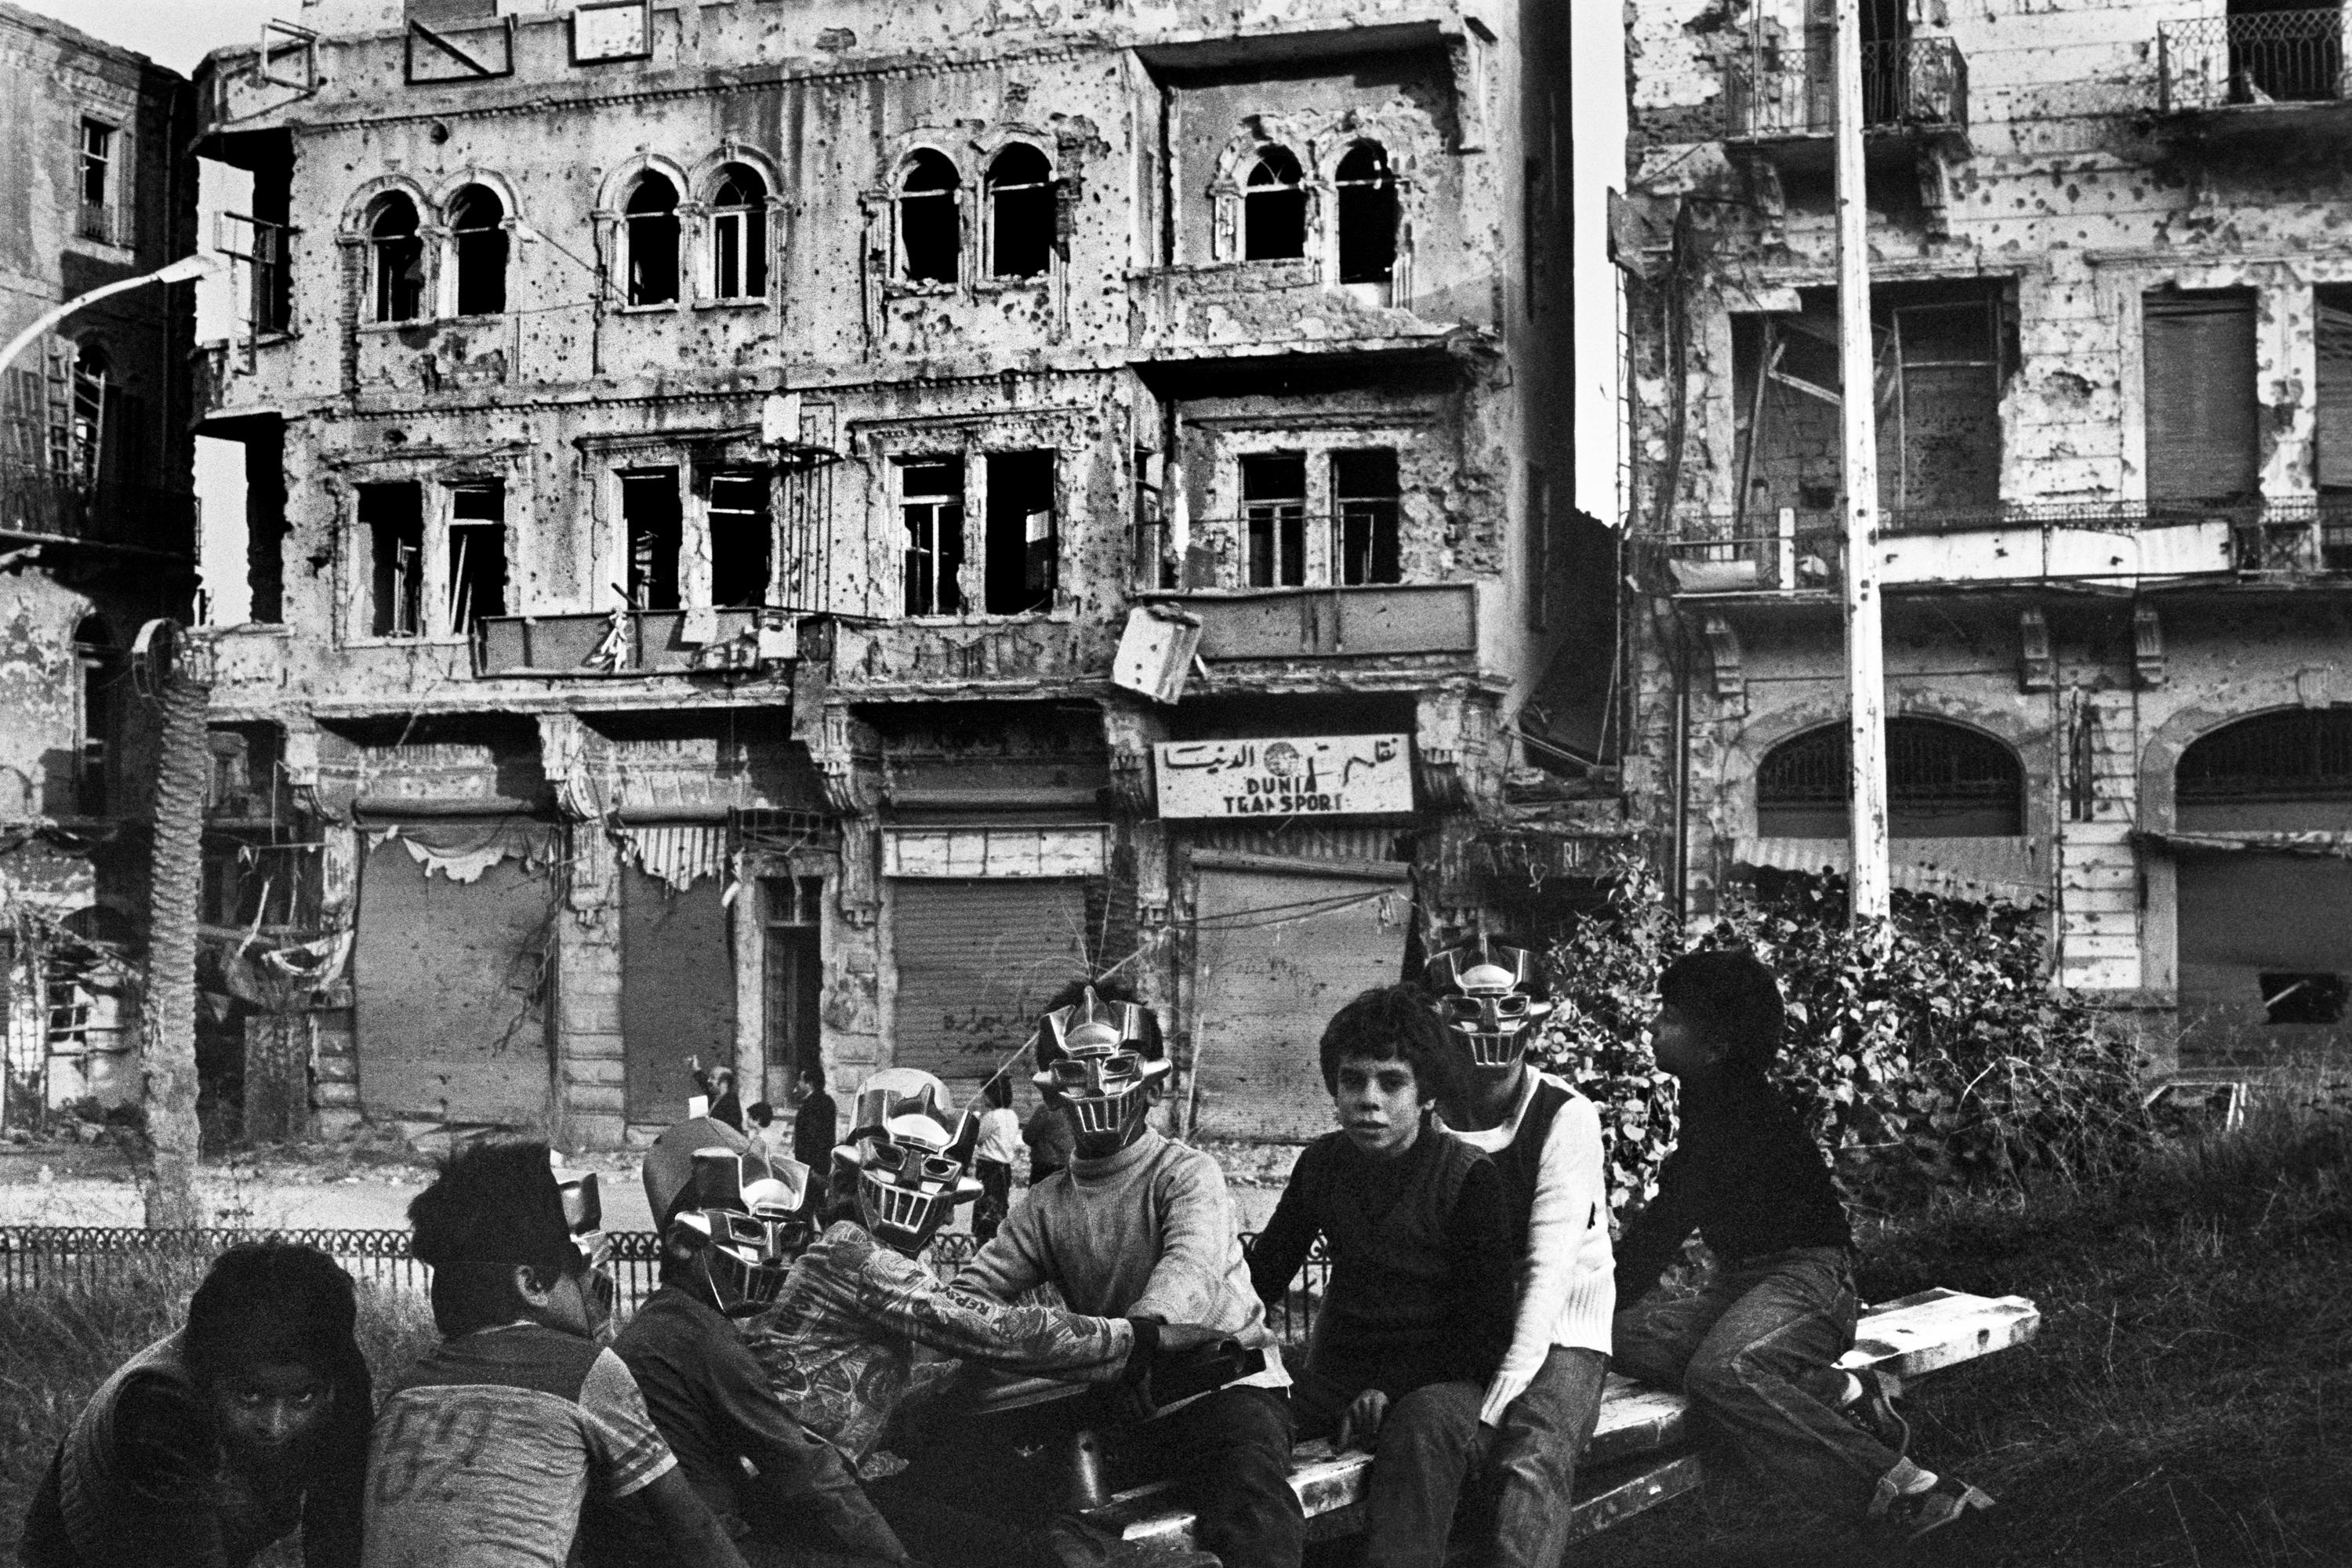 Children play as if totally oblivious to their surroundings in Beirut, Lebanon, in 1982. This area had already been damaged in the fighting in the Lebanon War, and would be center of more fighting ahead as Beirut became the focal point of most of the 3 year war.